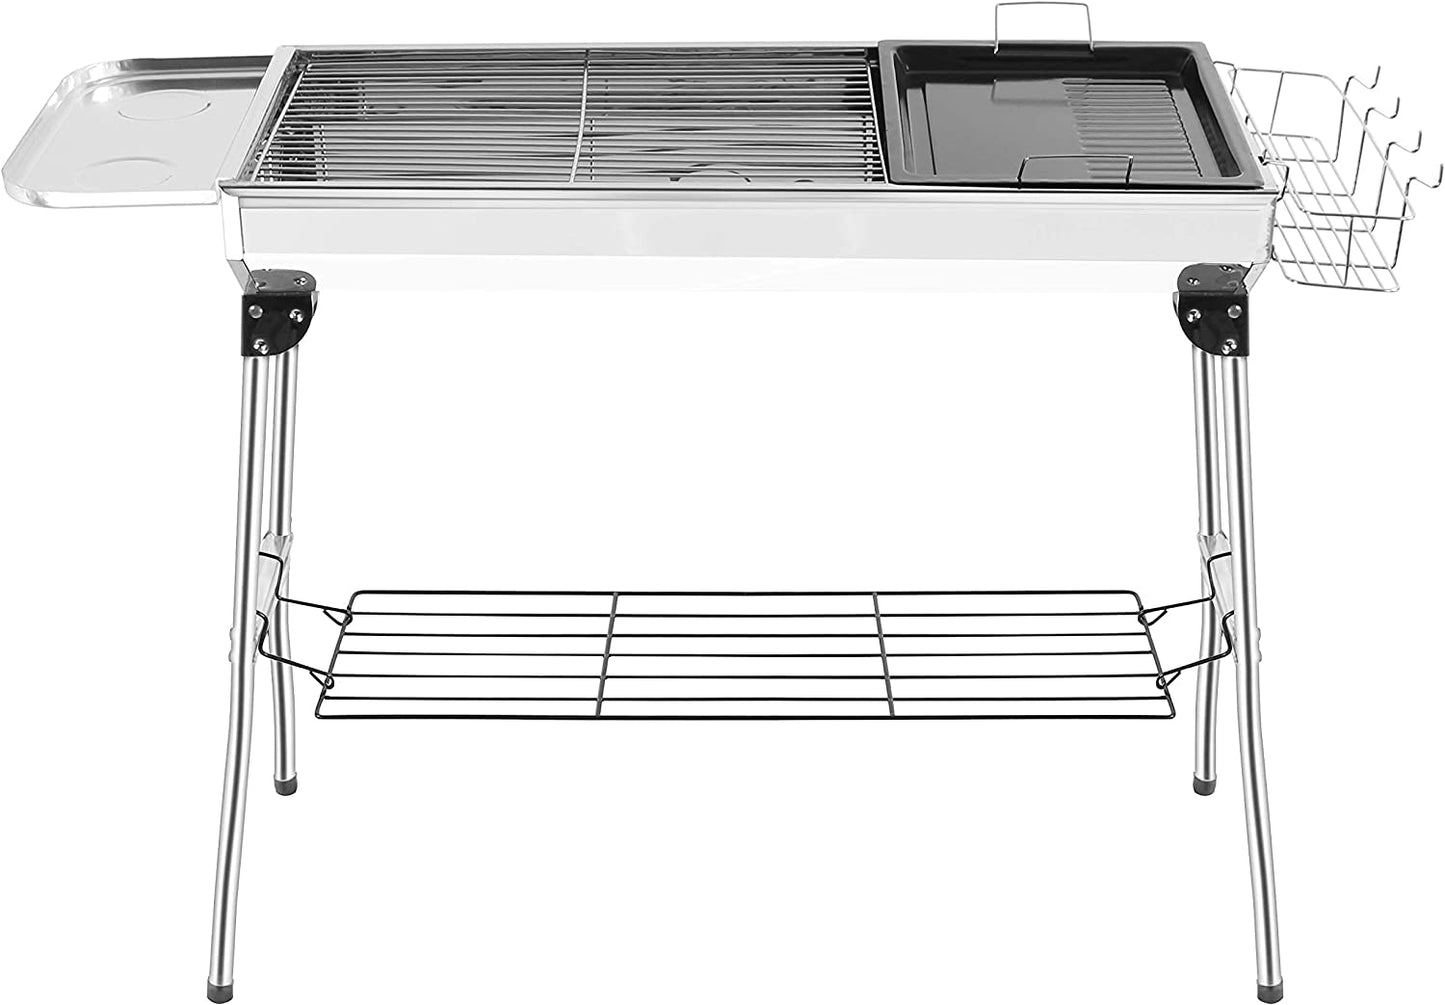 GRANDMA SHARK BBQ Grill, Stainless Steel Barbecue Grill with Stand, Foldable